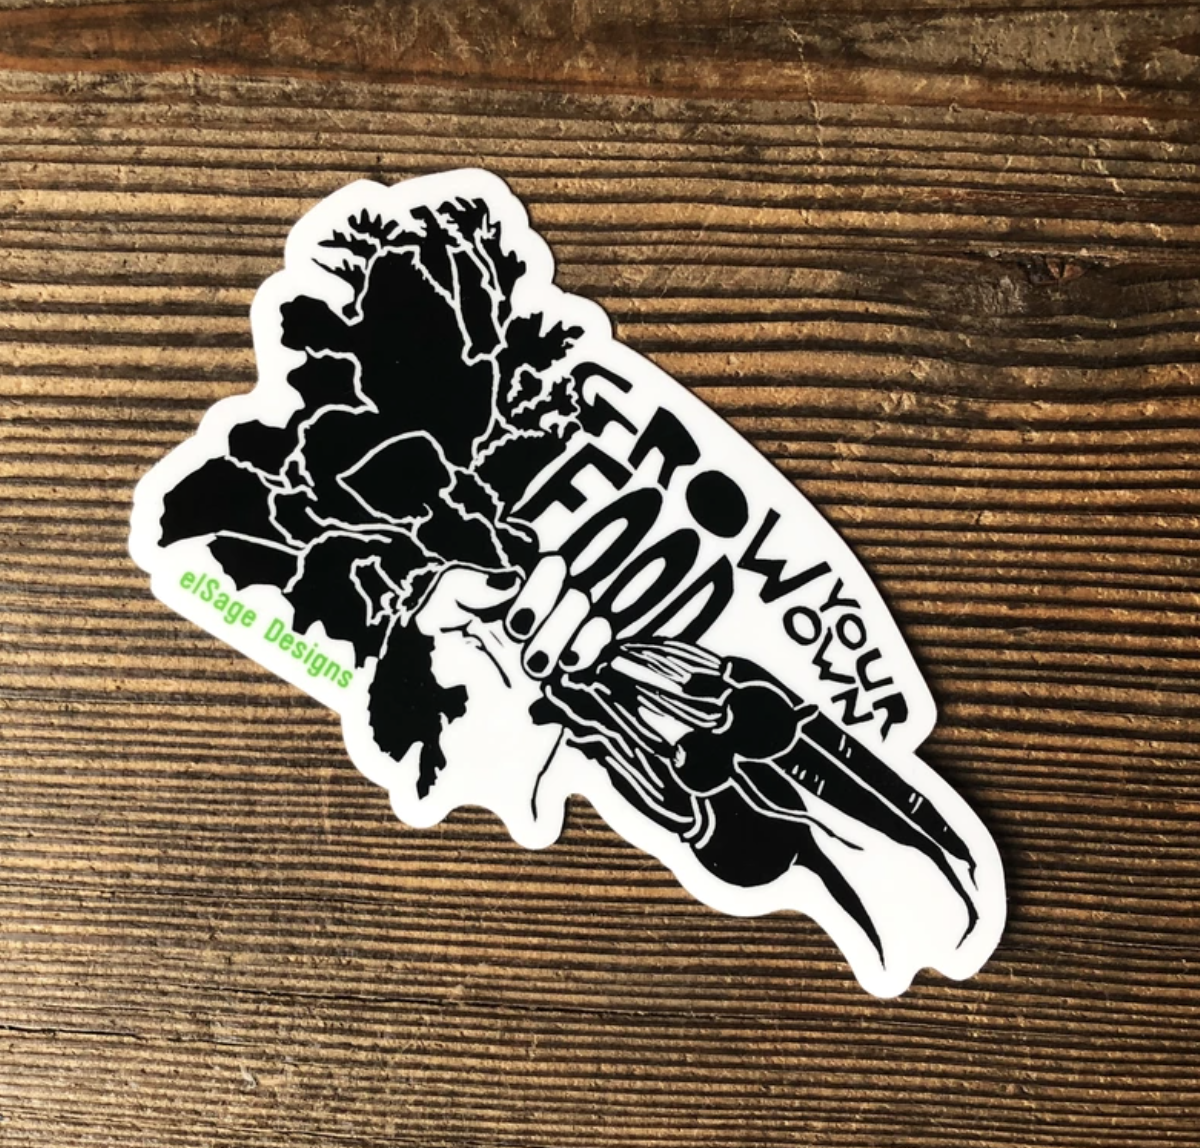 Sticker - Grow Your Own Food